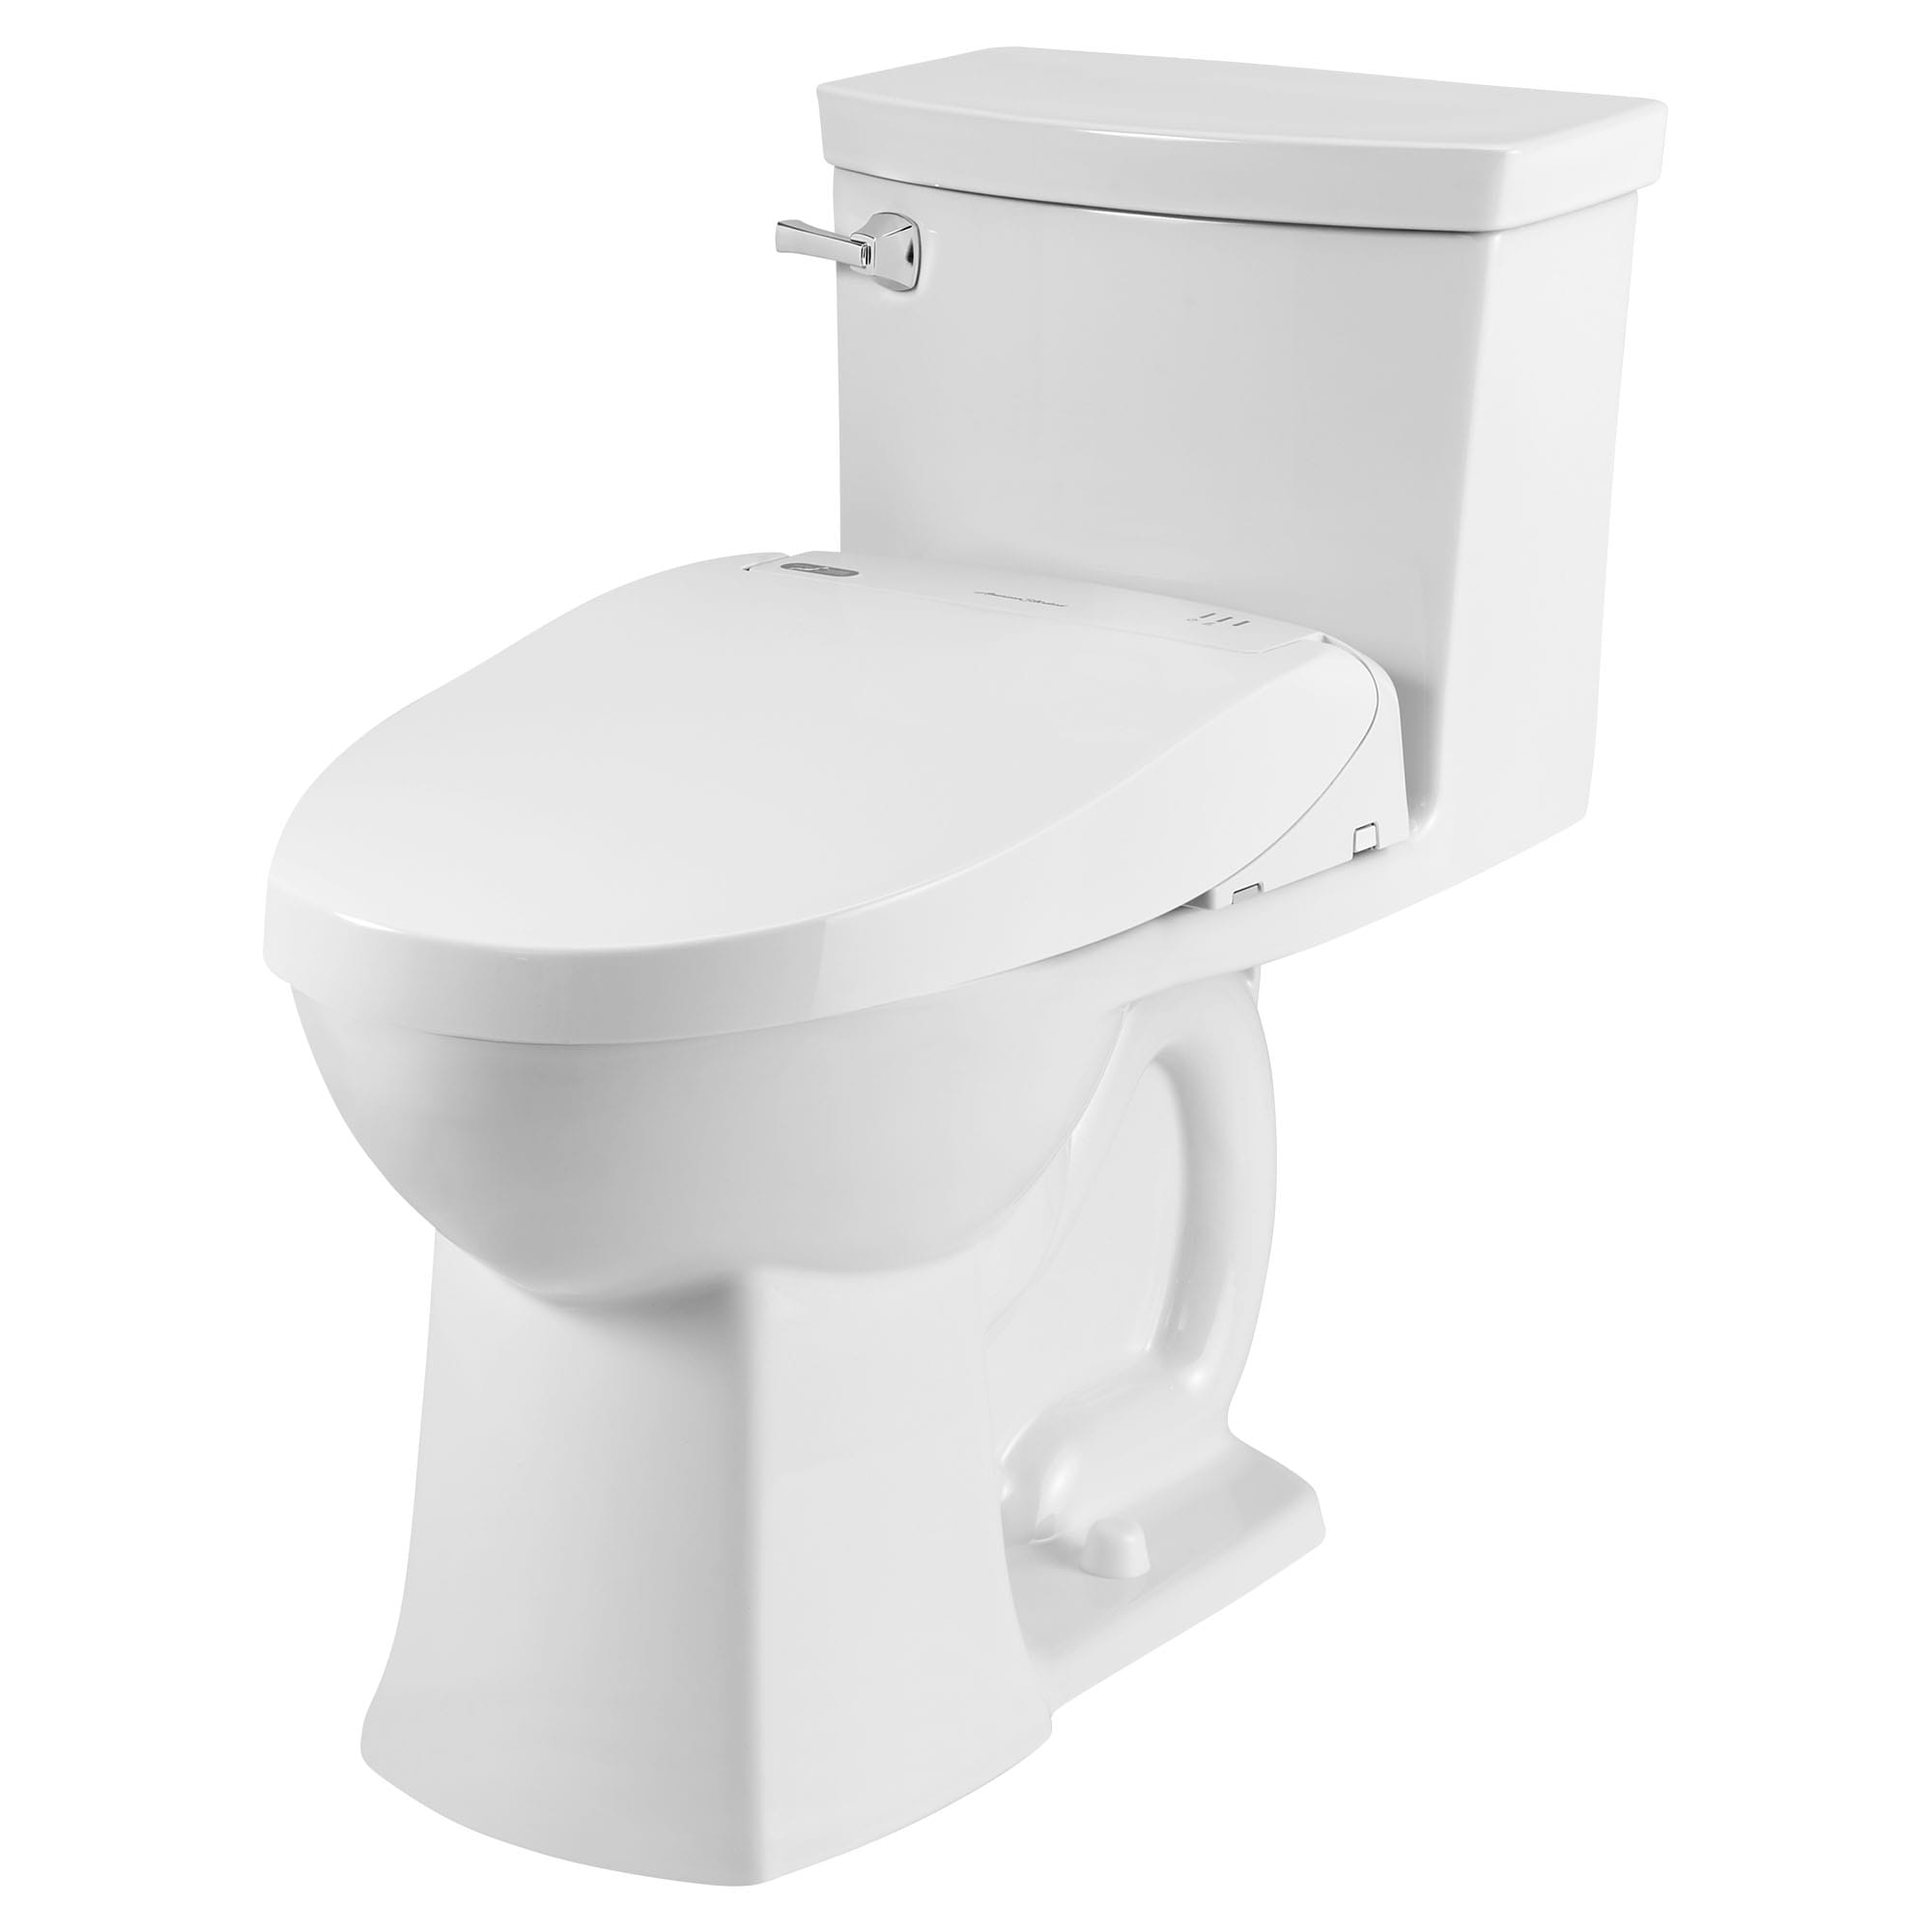 Advanced Clean® 3.0 Electric SpaLet® Bidet Seat With Remote Operation